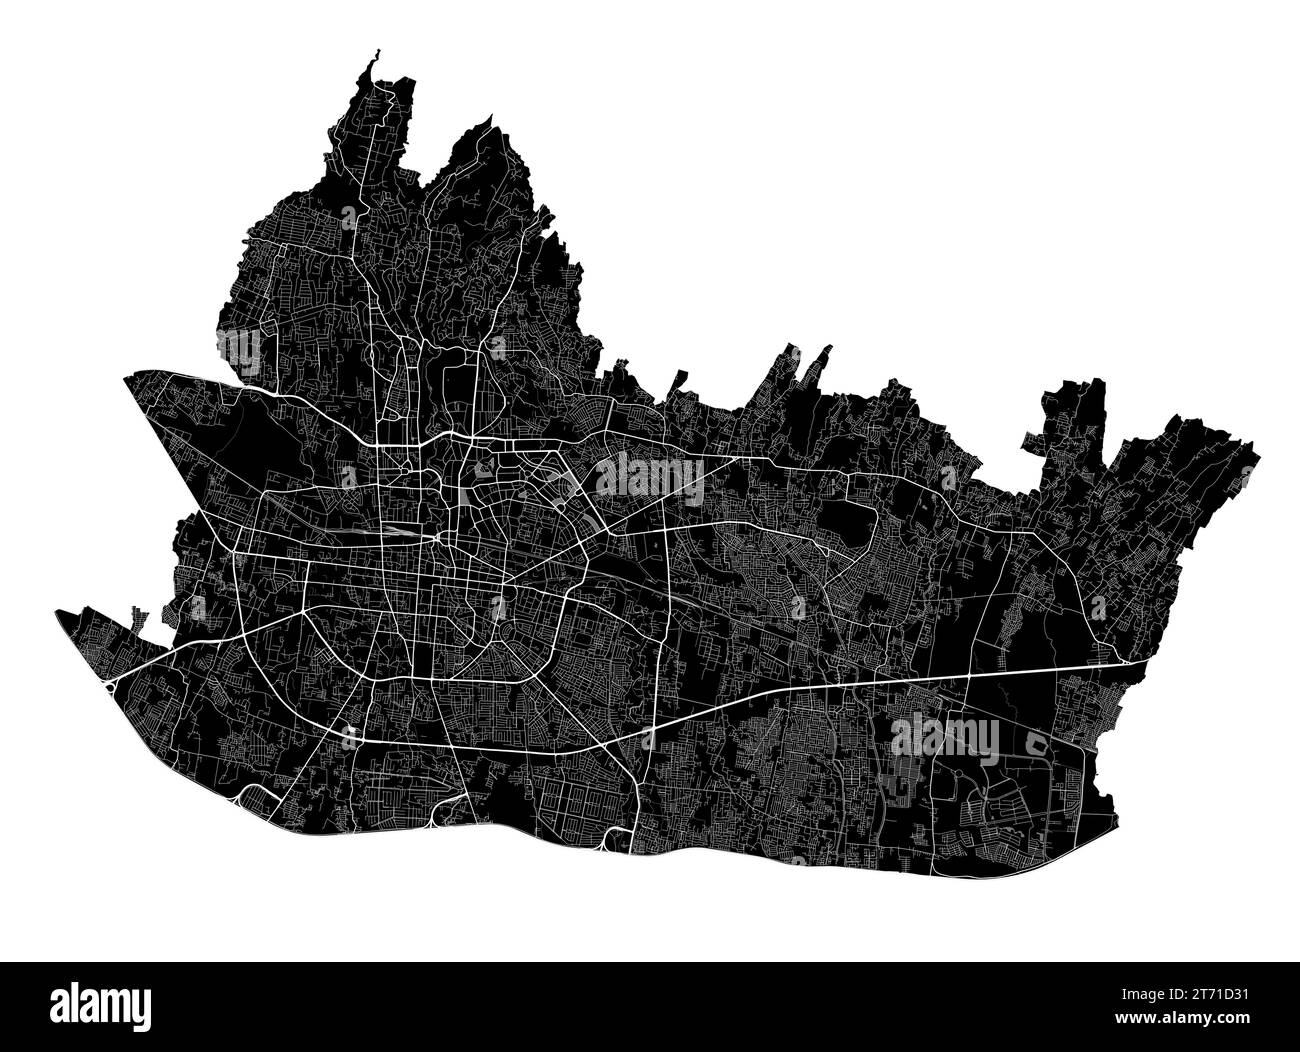 Bandung map. Detailed black map of Bandung city administrative area. Cityscape poster metropolitan aria view. Black land with white roads and avenues. Stock Vector